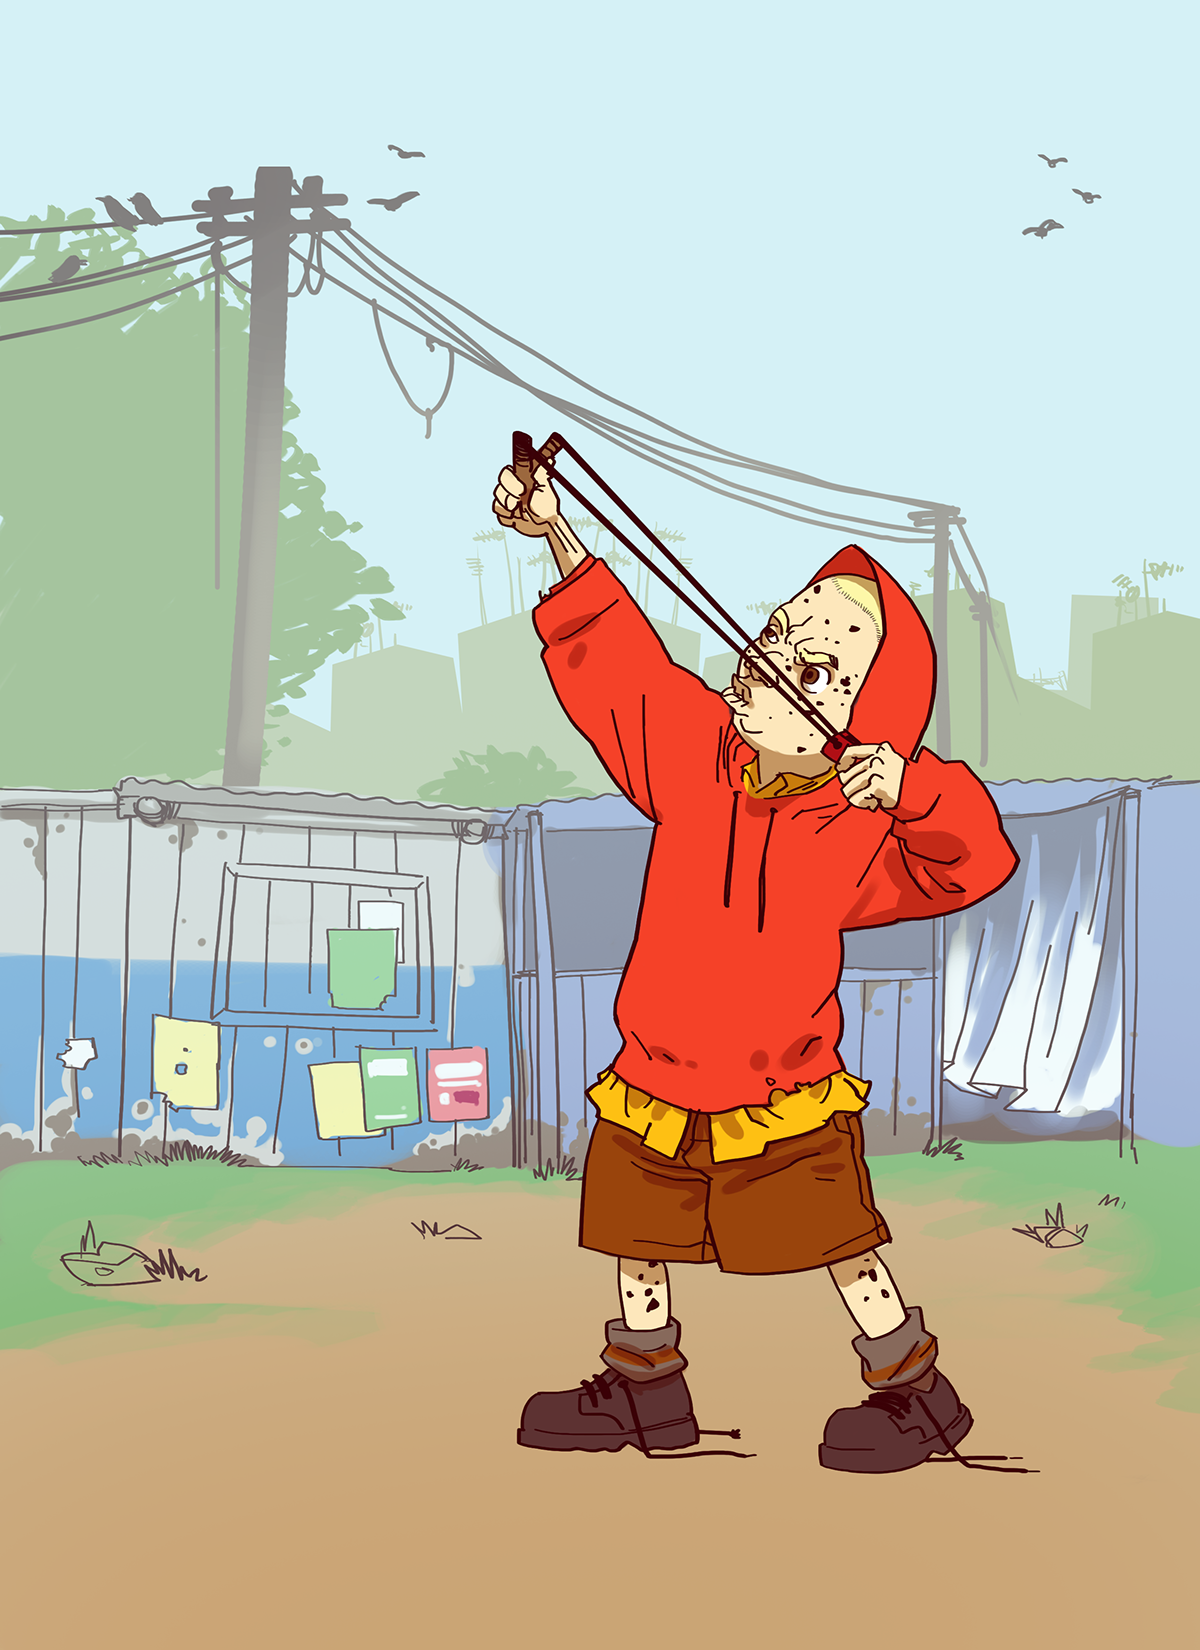 Albino boy playing with a catapult in Dunamis comic